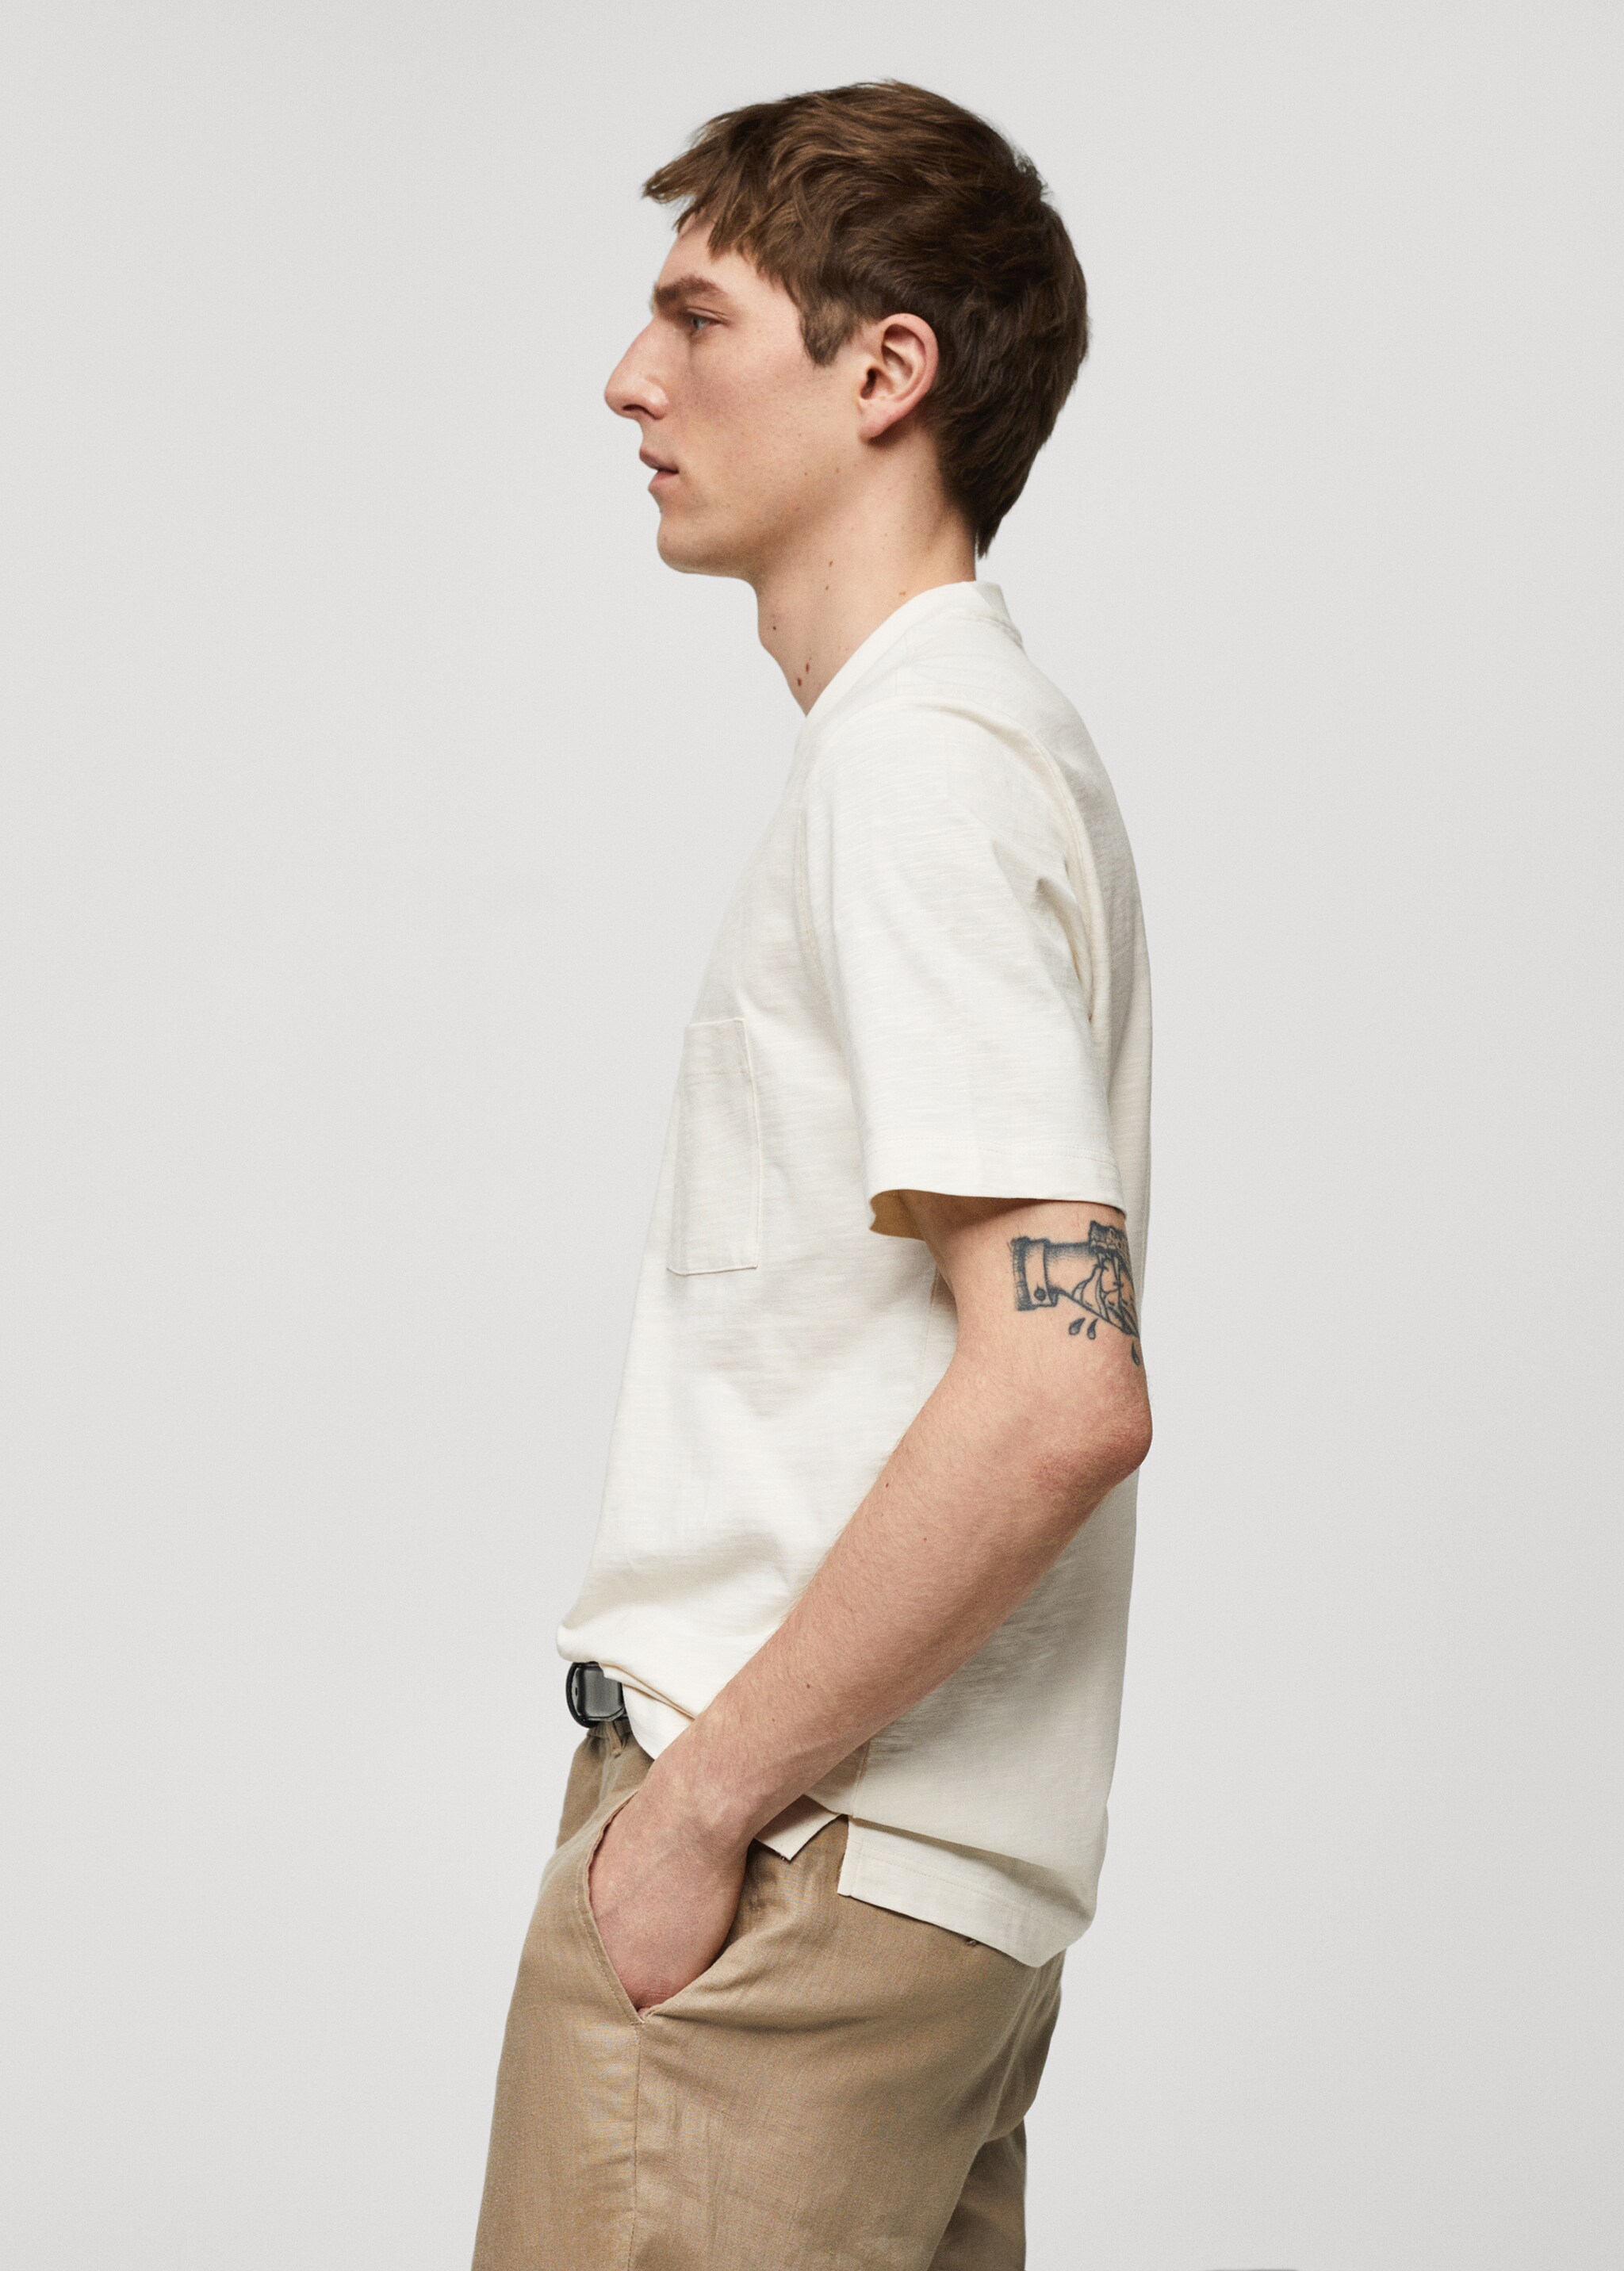 100% cotton t-shirt with pocket - Details of the article 2